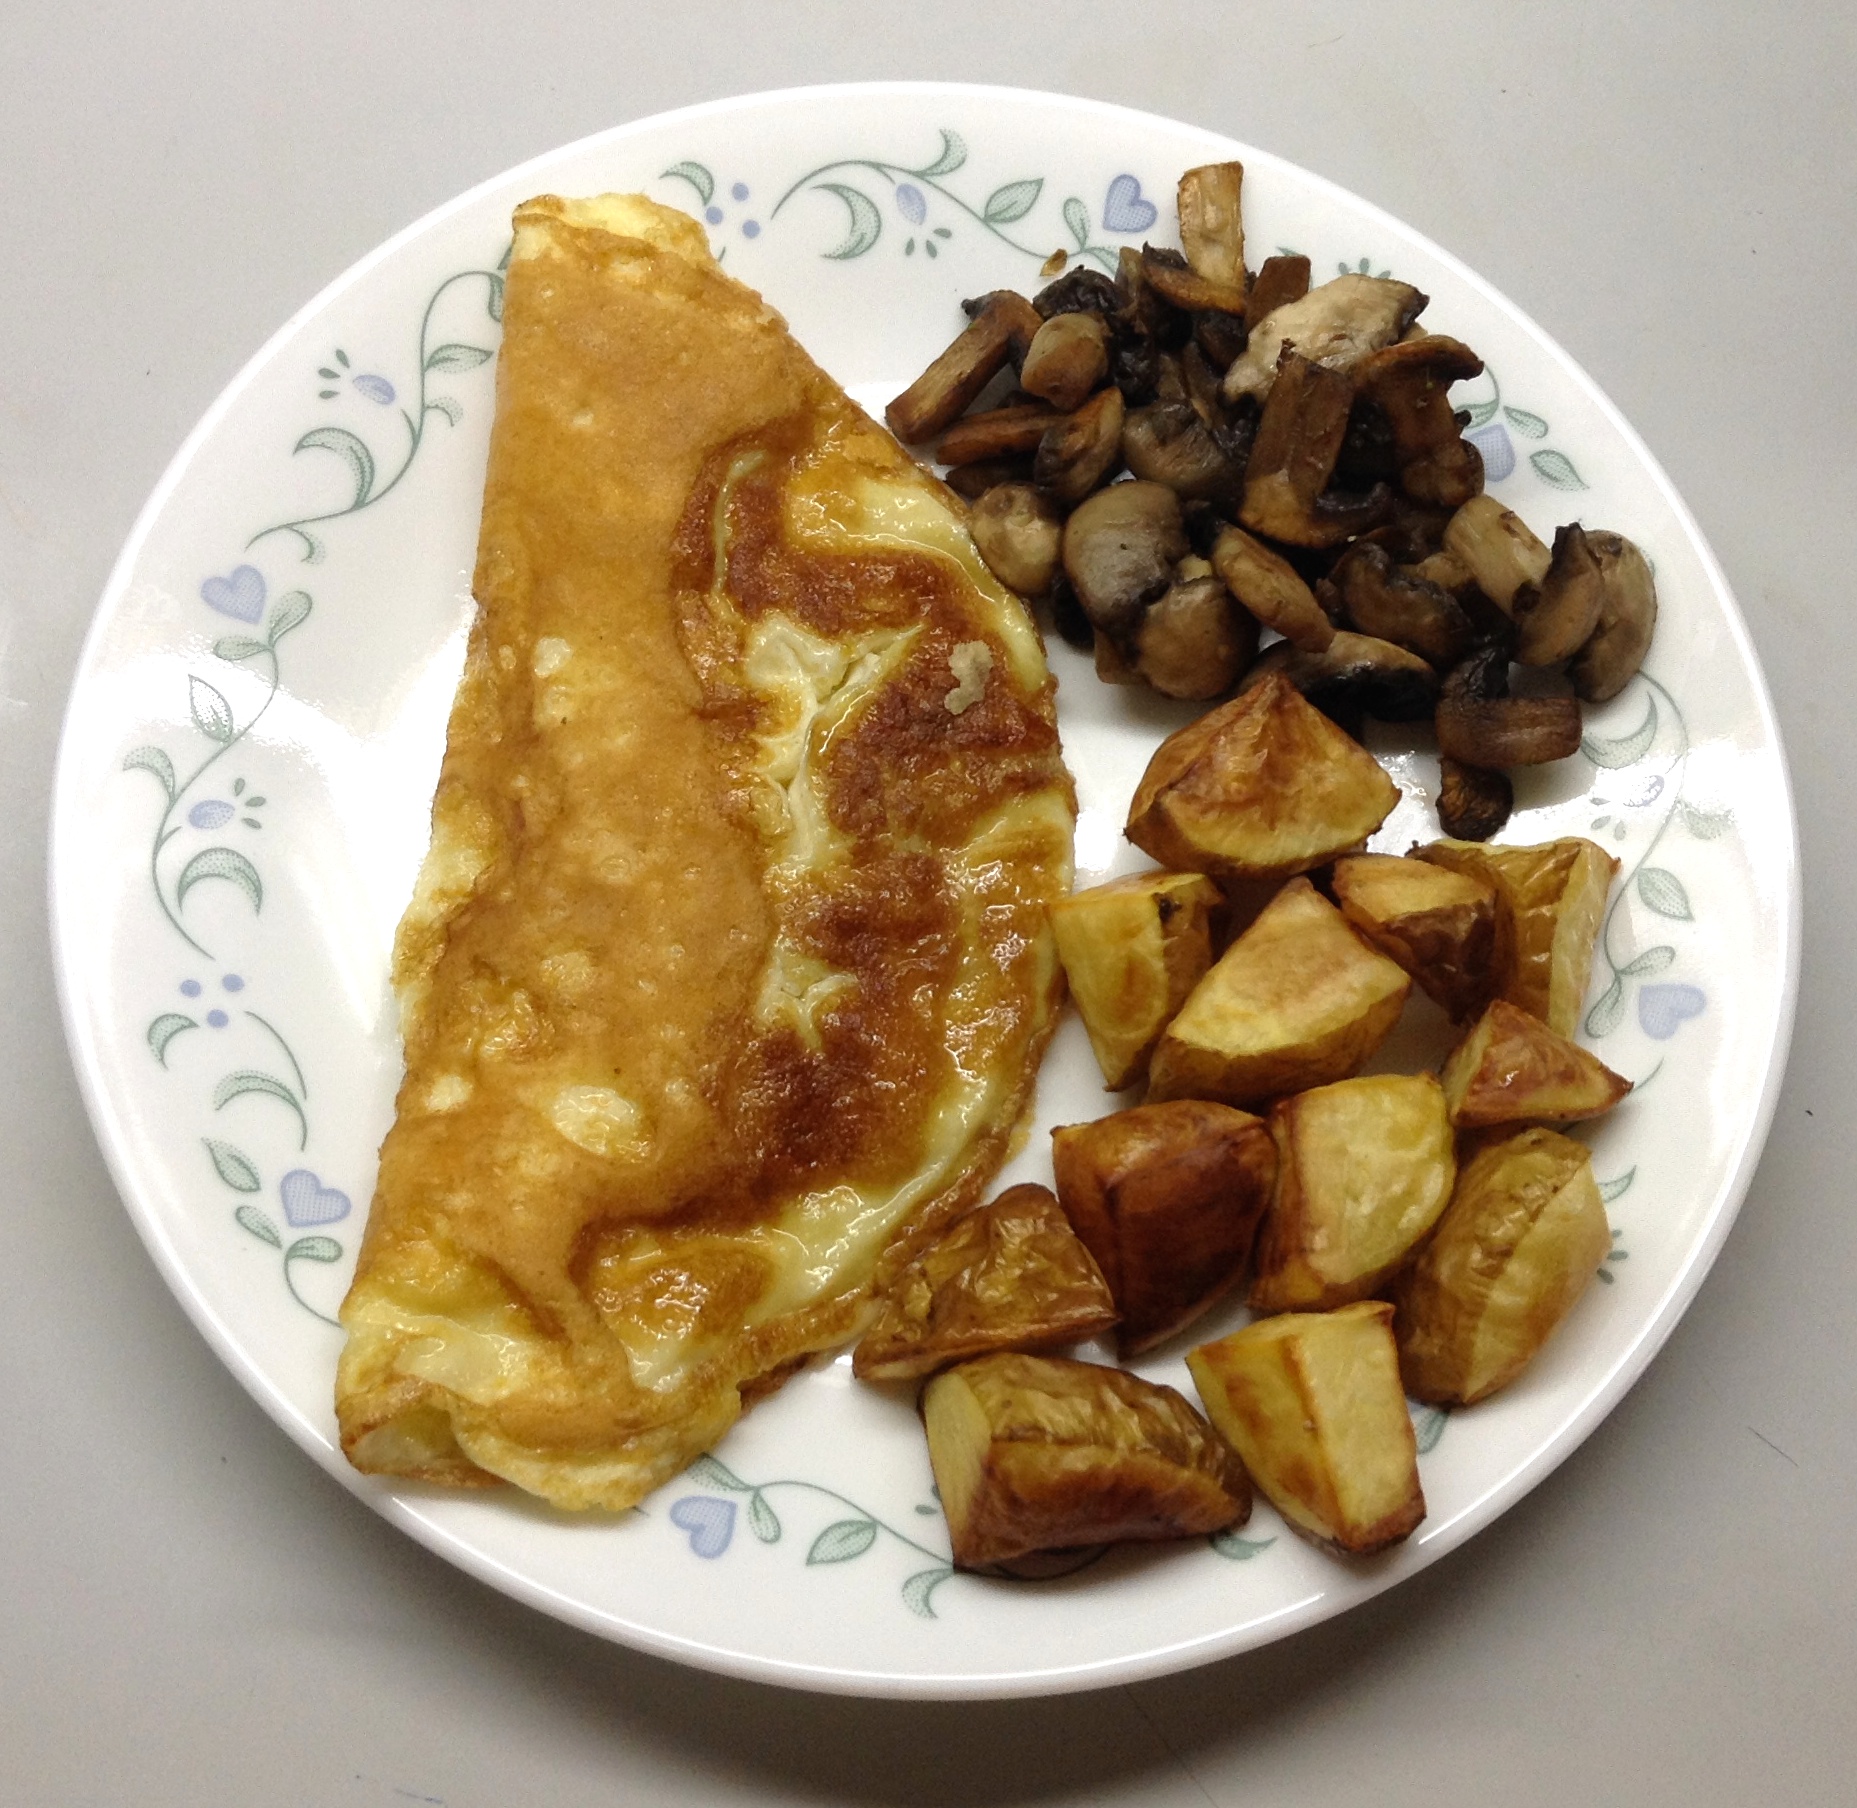 Omelet with potatoes & mushrooms